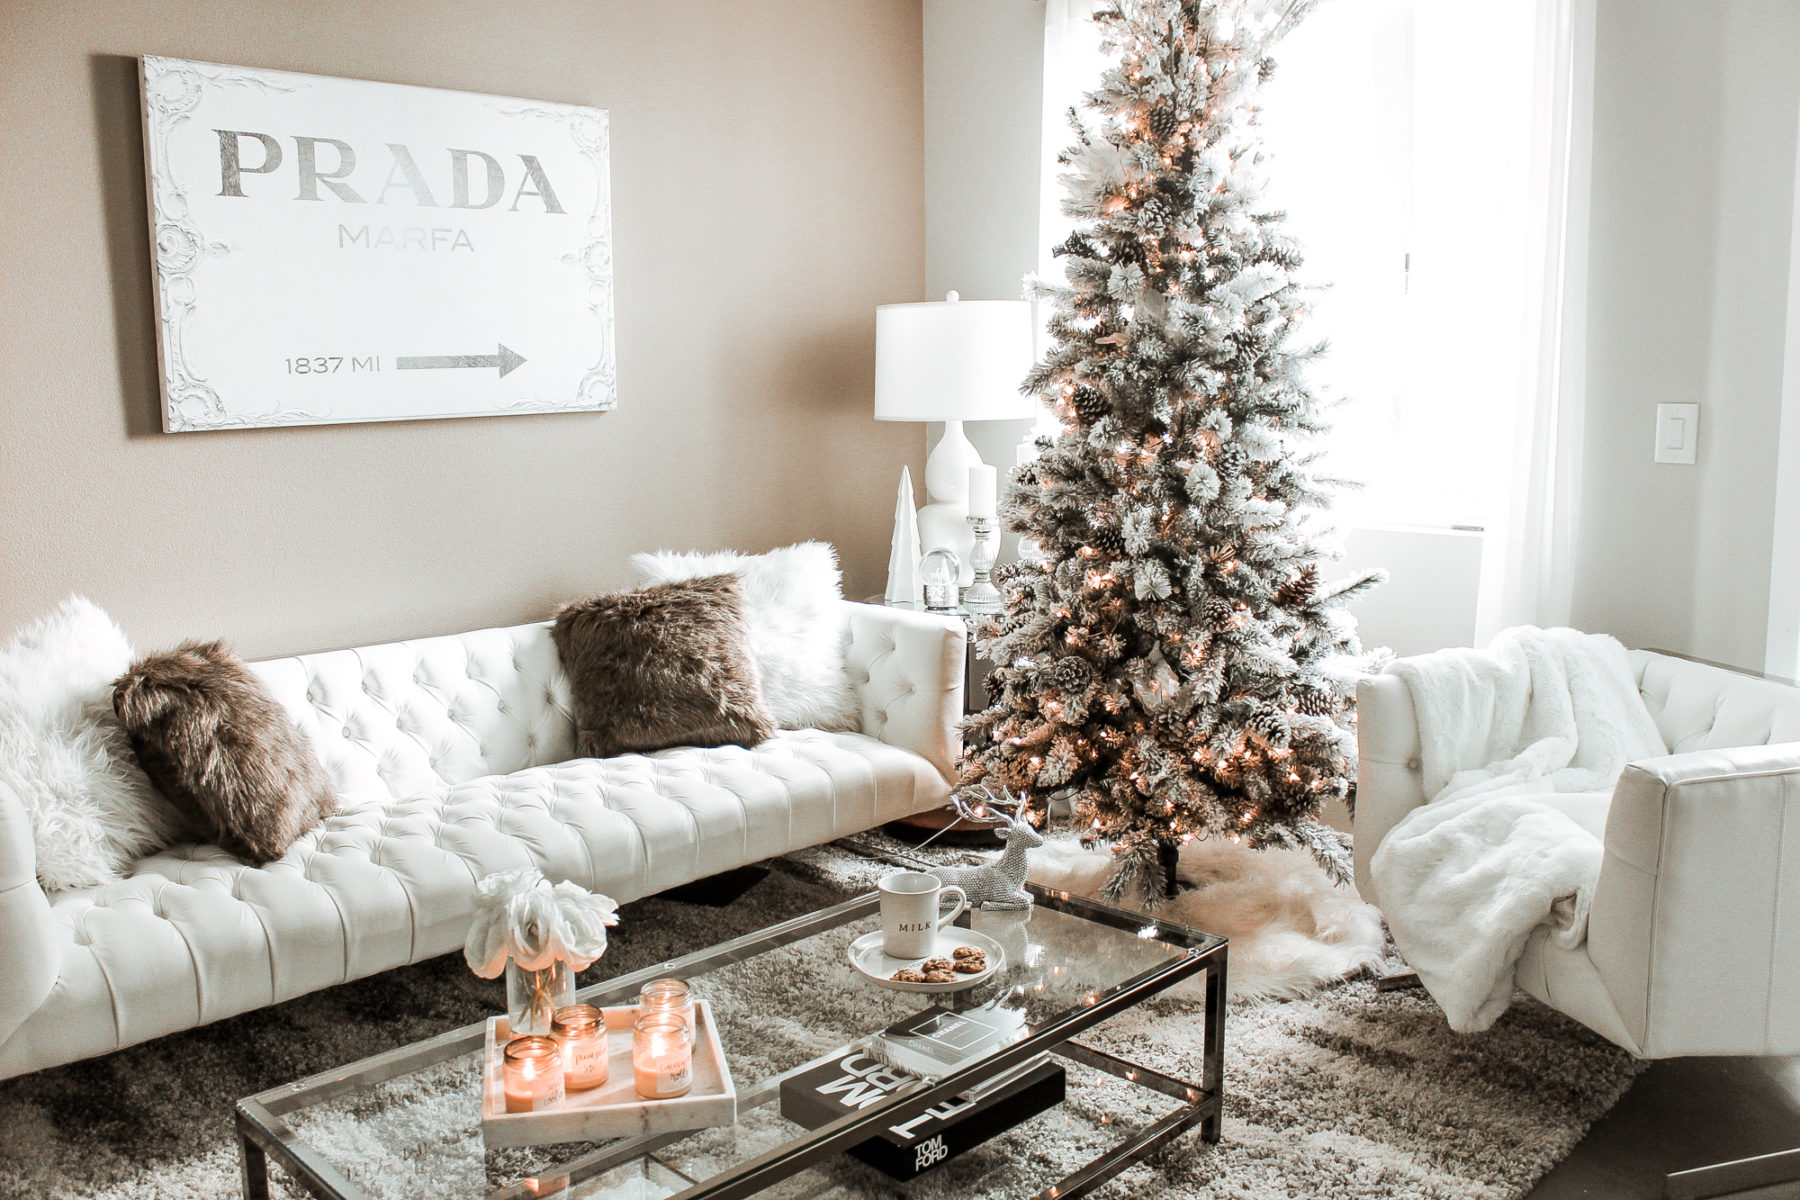 Neutral Christmas Decor | Flocked Christmas Tree | Pinecone Christmas Tree | Milk & Cookies | Hayley Larue Decor | Brown, Green, & White Christmas Decor | Blondie in the City by Hayley Larue